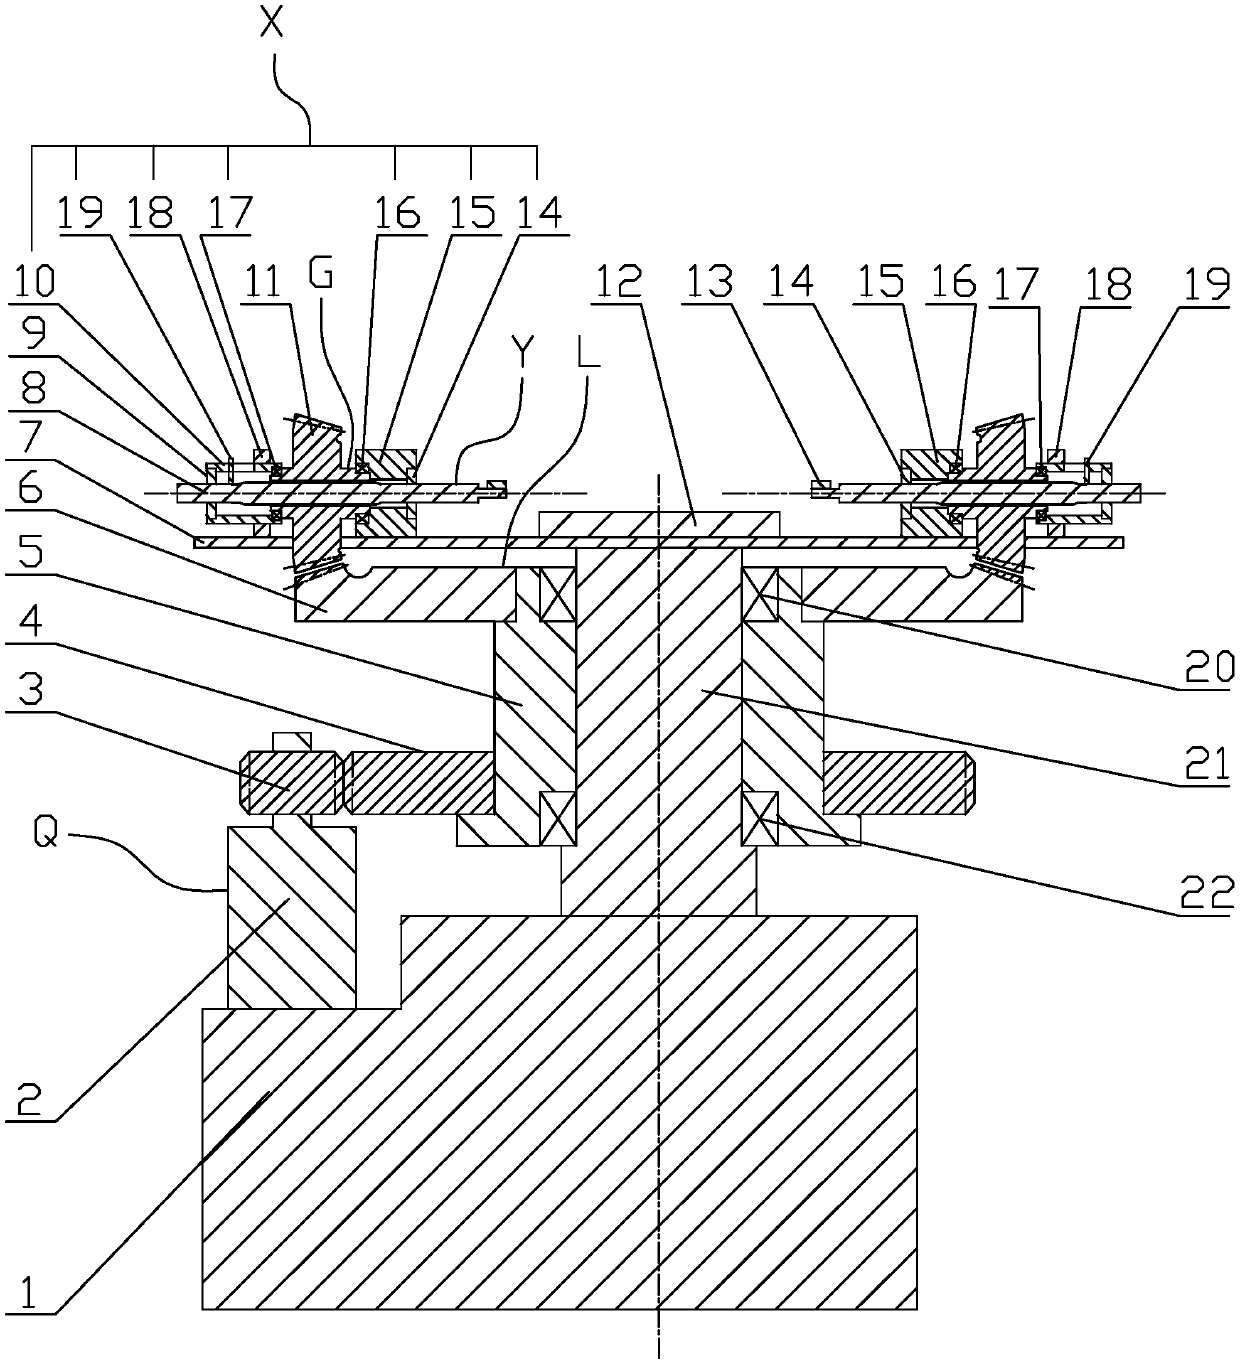 Tool device integrating linear motion and rotating motion and control mode